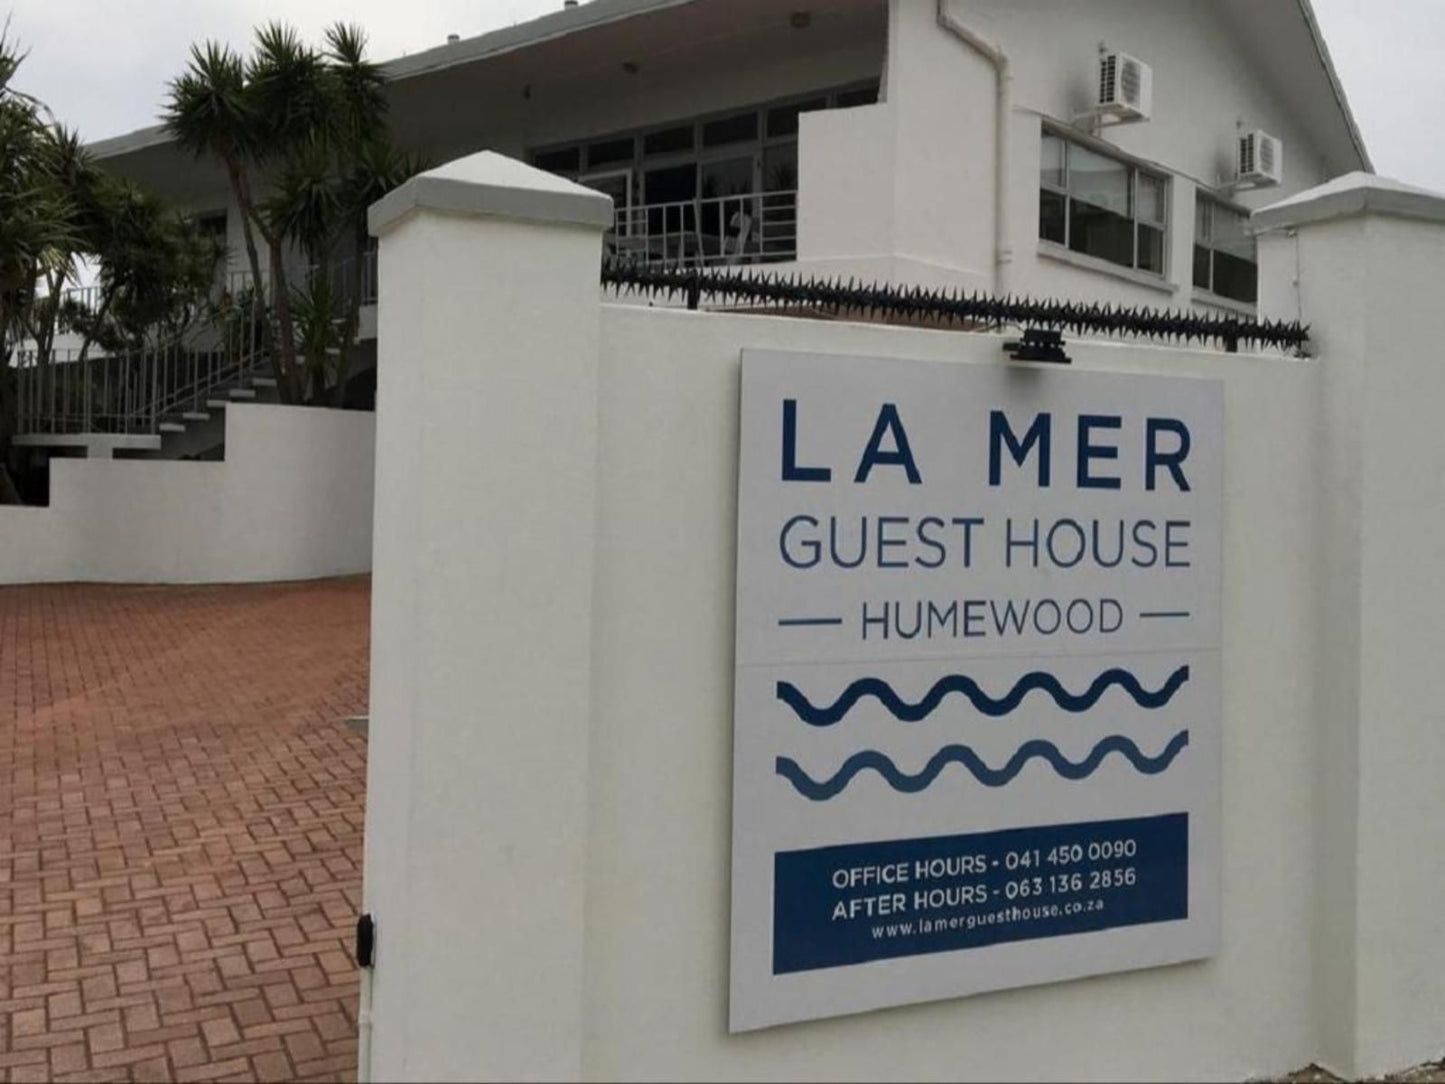 La Mer Guesthouse Humewood Port Elizabeth Eastern Cape South Africa House, Building, Architecture, Palm Tree, Plant, Nature, Wood, Sign, Text